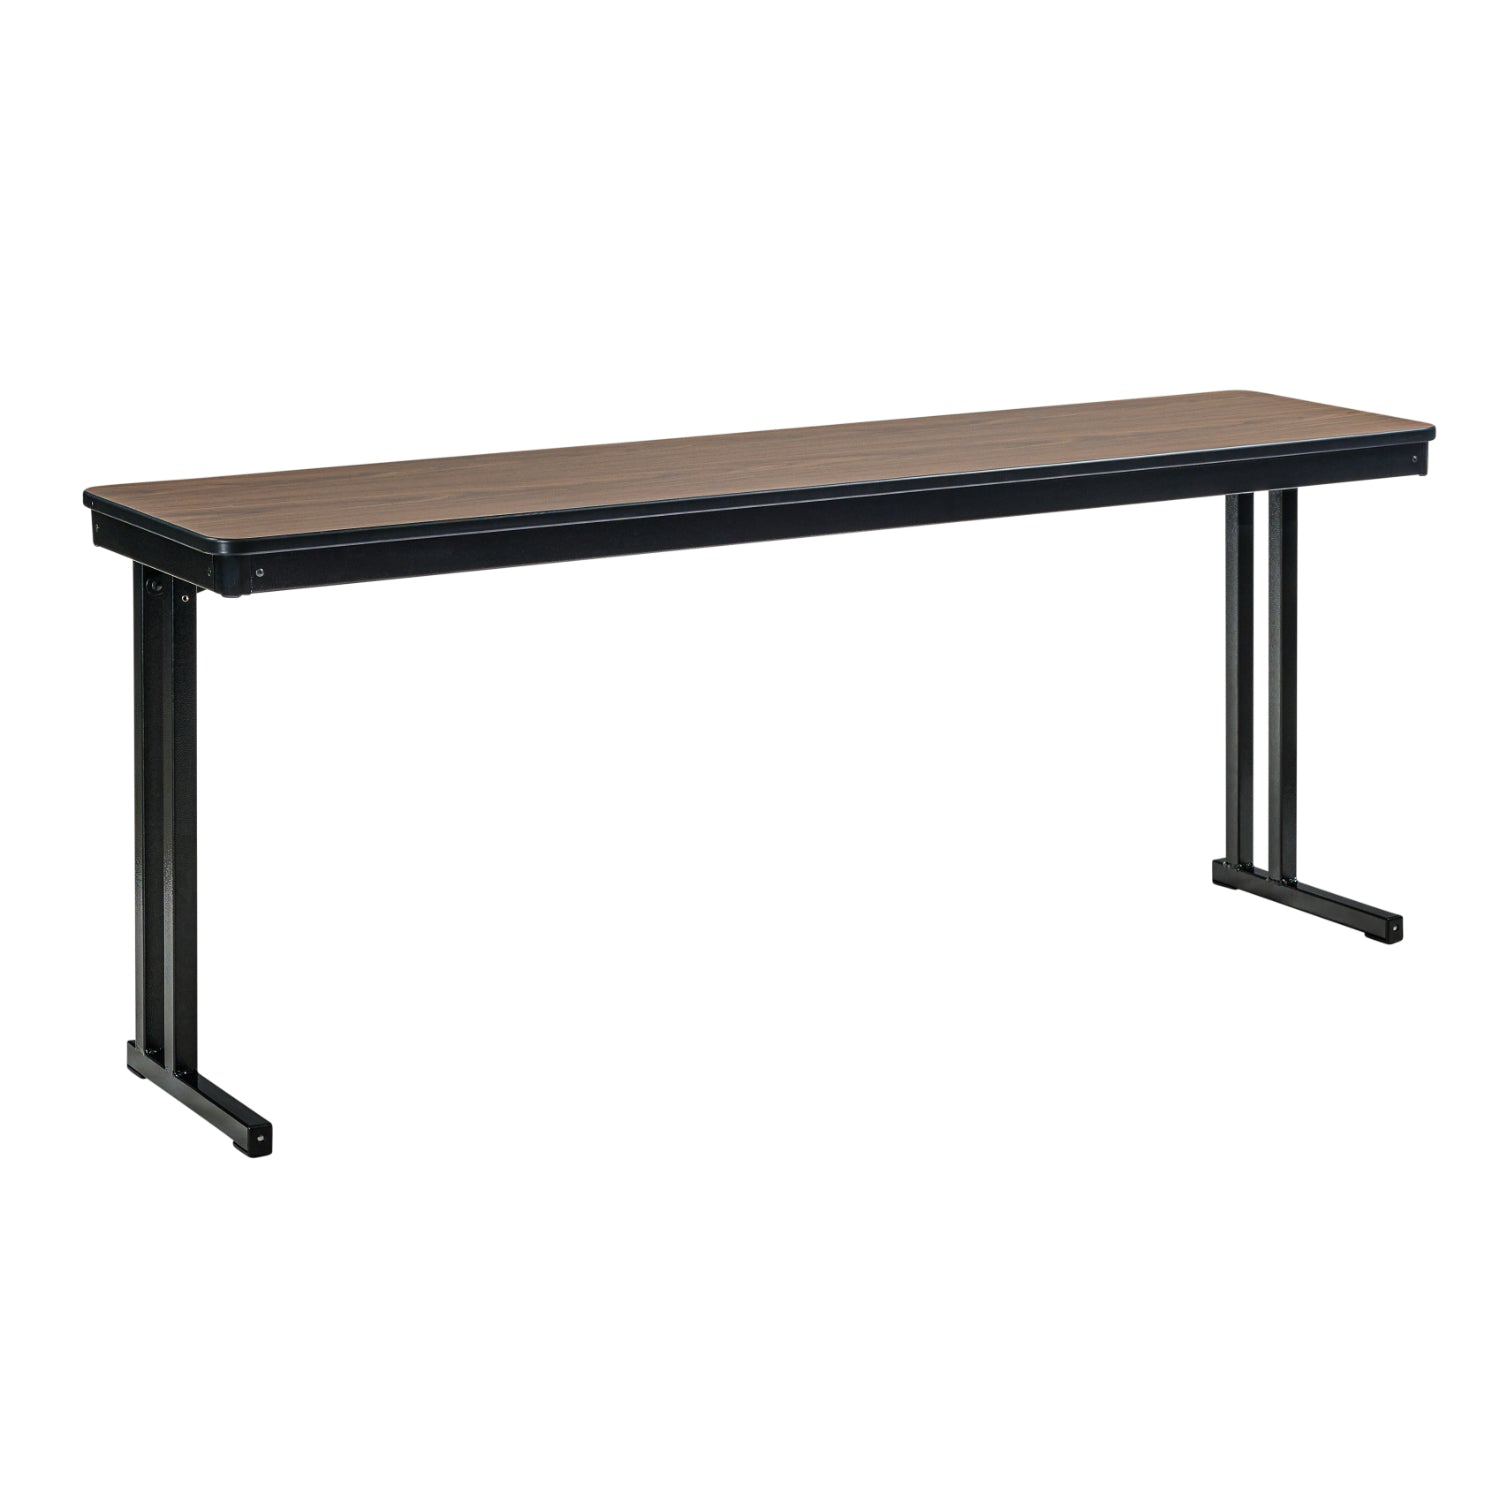 Max Seating Folding Training and Seminar Table with Cantilever Legs, 24" x 84", High Pressure Laminate Top with Particleboard Core/T-Mold Edge